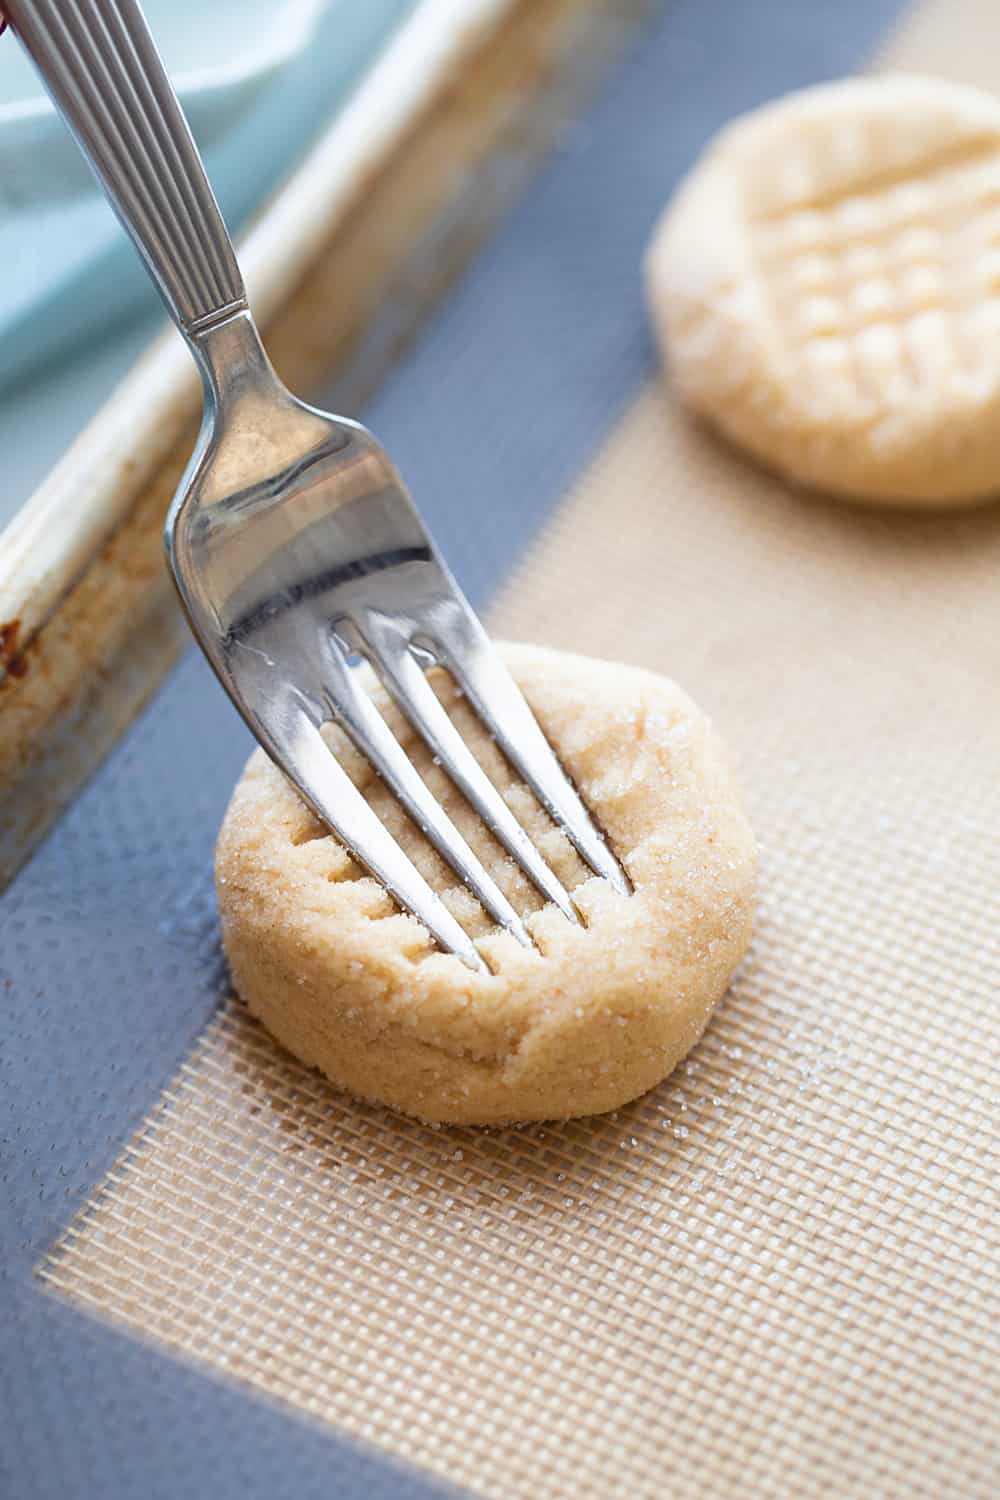 Old-Fashioned Peanut Butter Cookies - Old-fashioned peanut butter cookies are soft, chewy, and oh, so good! Friends and family (and my taste buds) always rave when I bake a batch. #halfscratched #peanutbutter #cookies #cookierecipe #baking #peanutbuttercookies #desserts #sweets #cookies